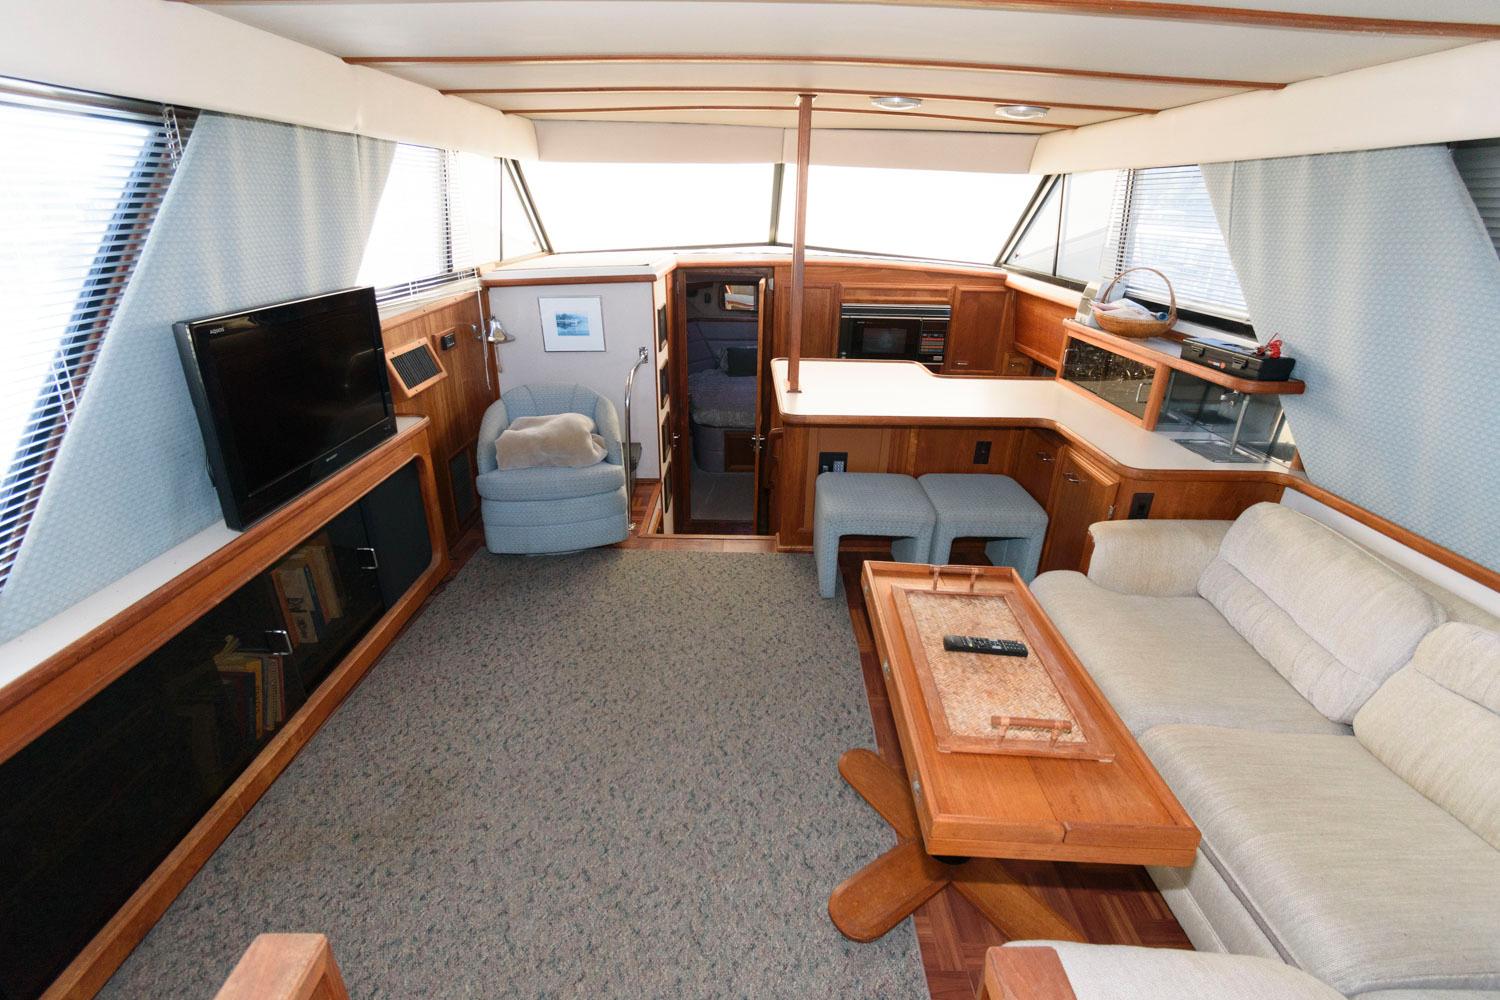 M 7038 MD Knot 10 Yacht Sales